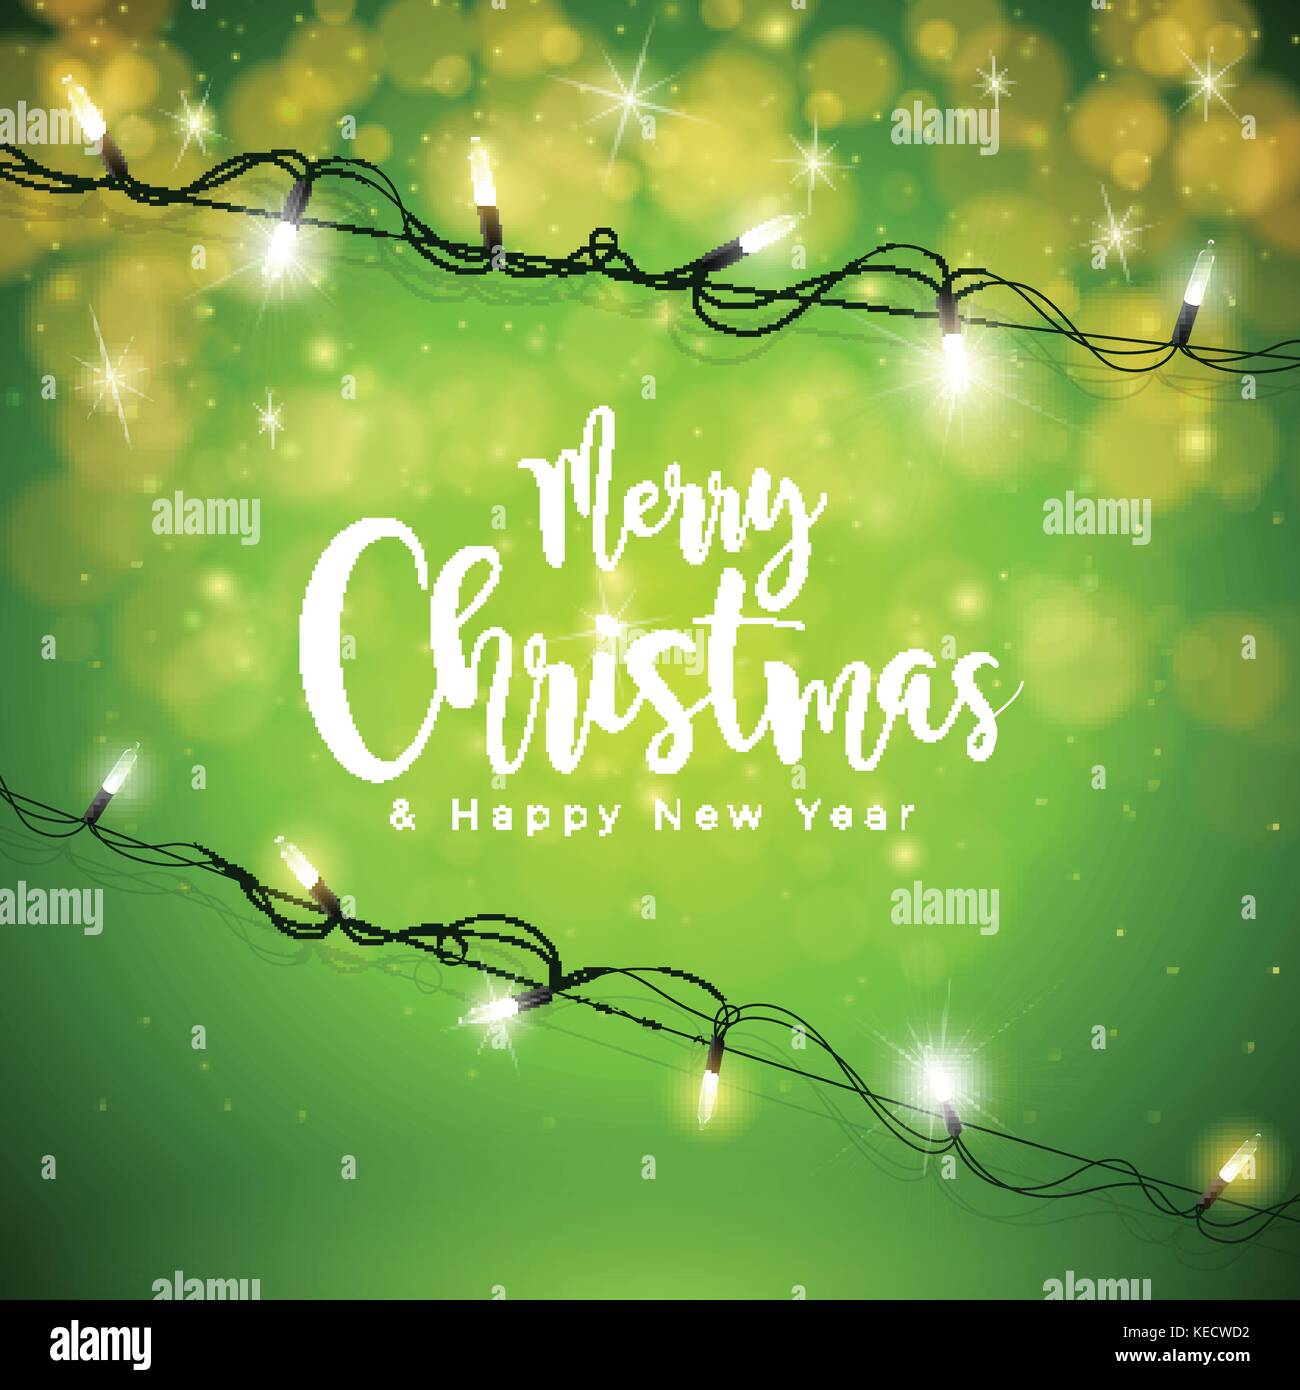 Vector Merry Christmas Illustration on Green Background with Typography and Holiday Light Garland. Stock Vector